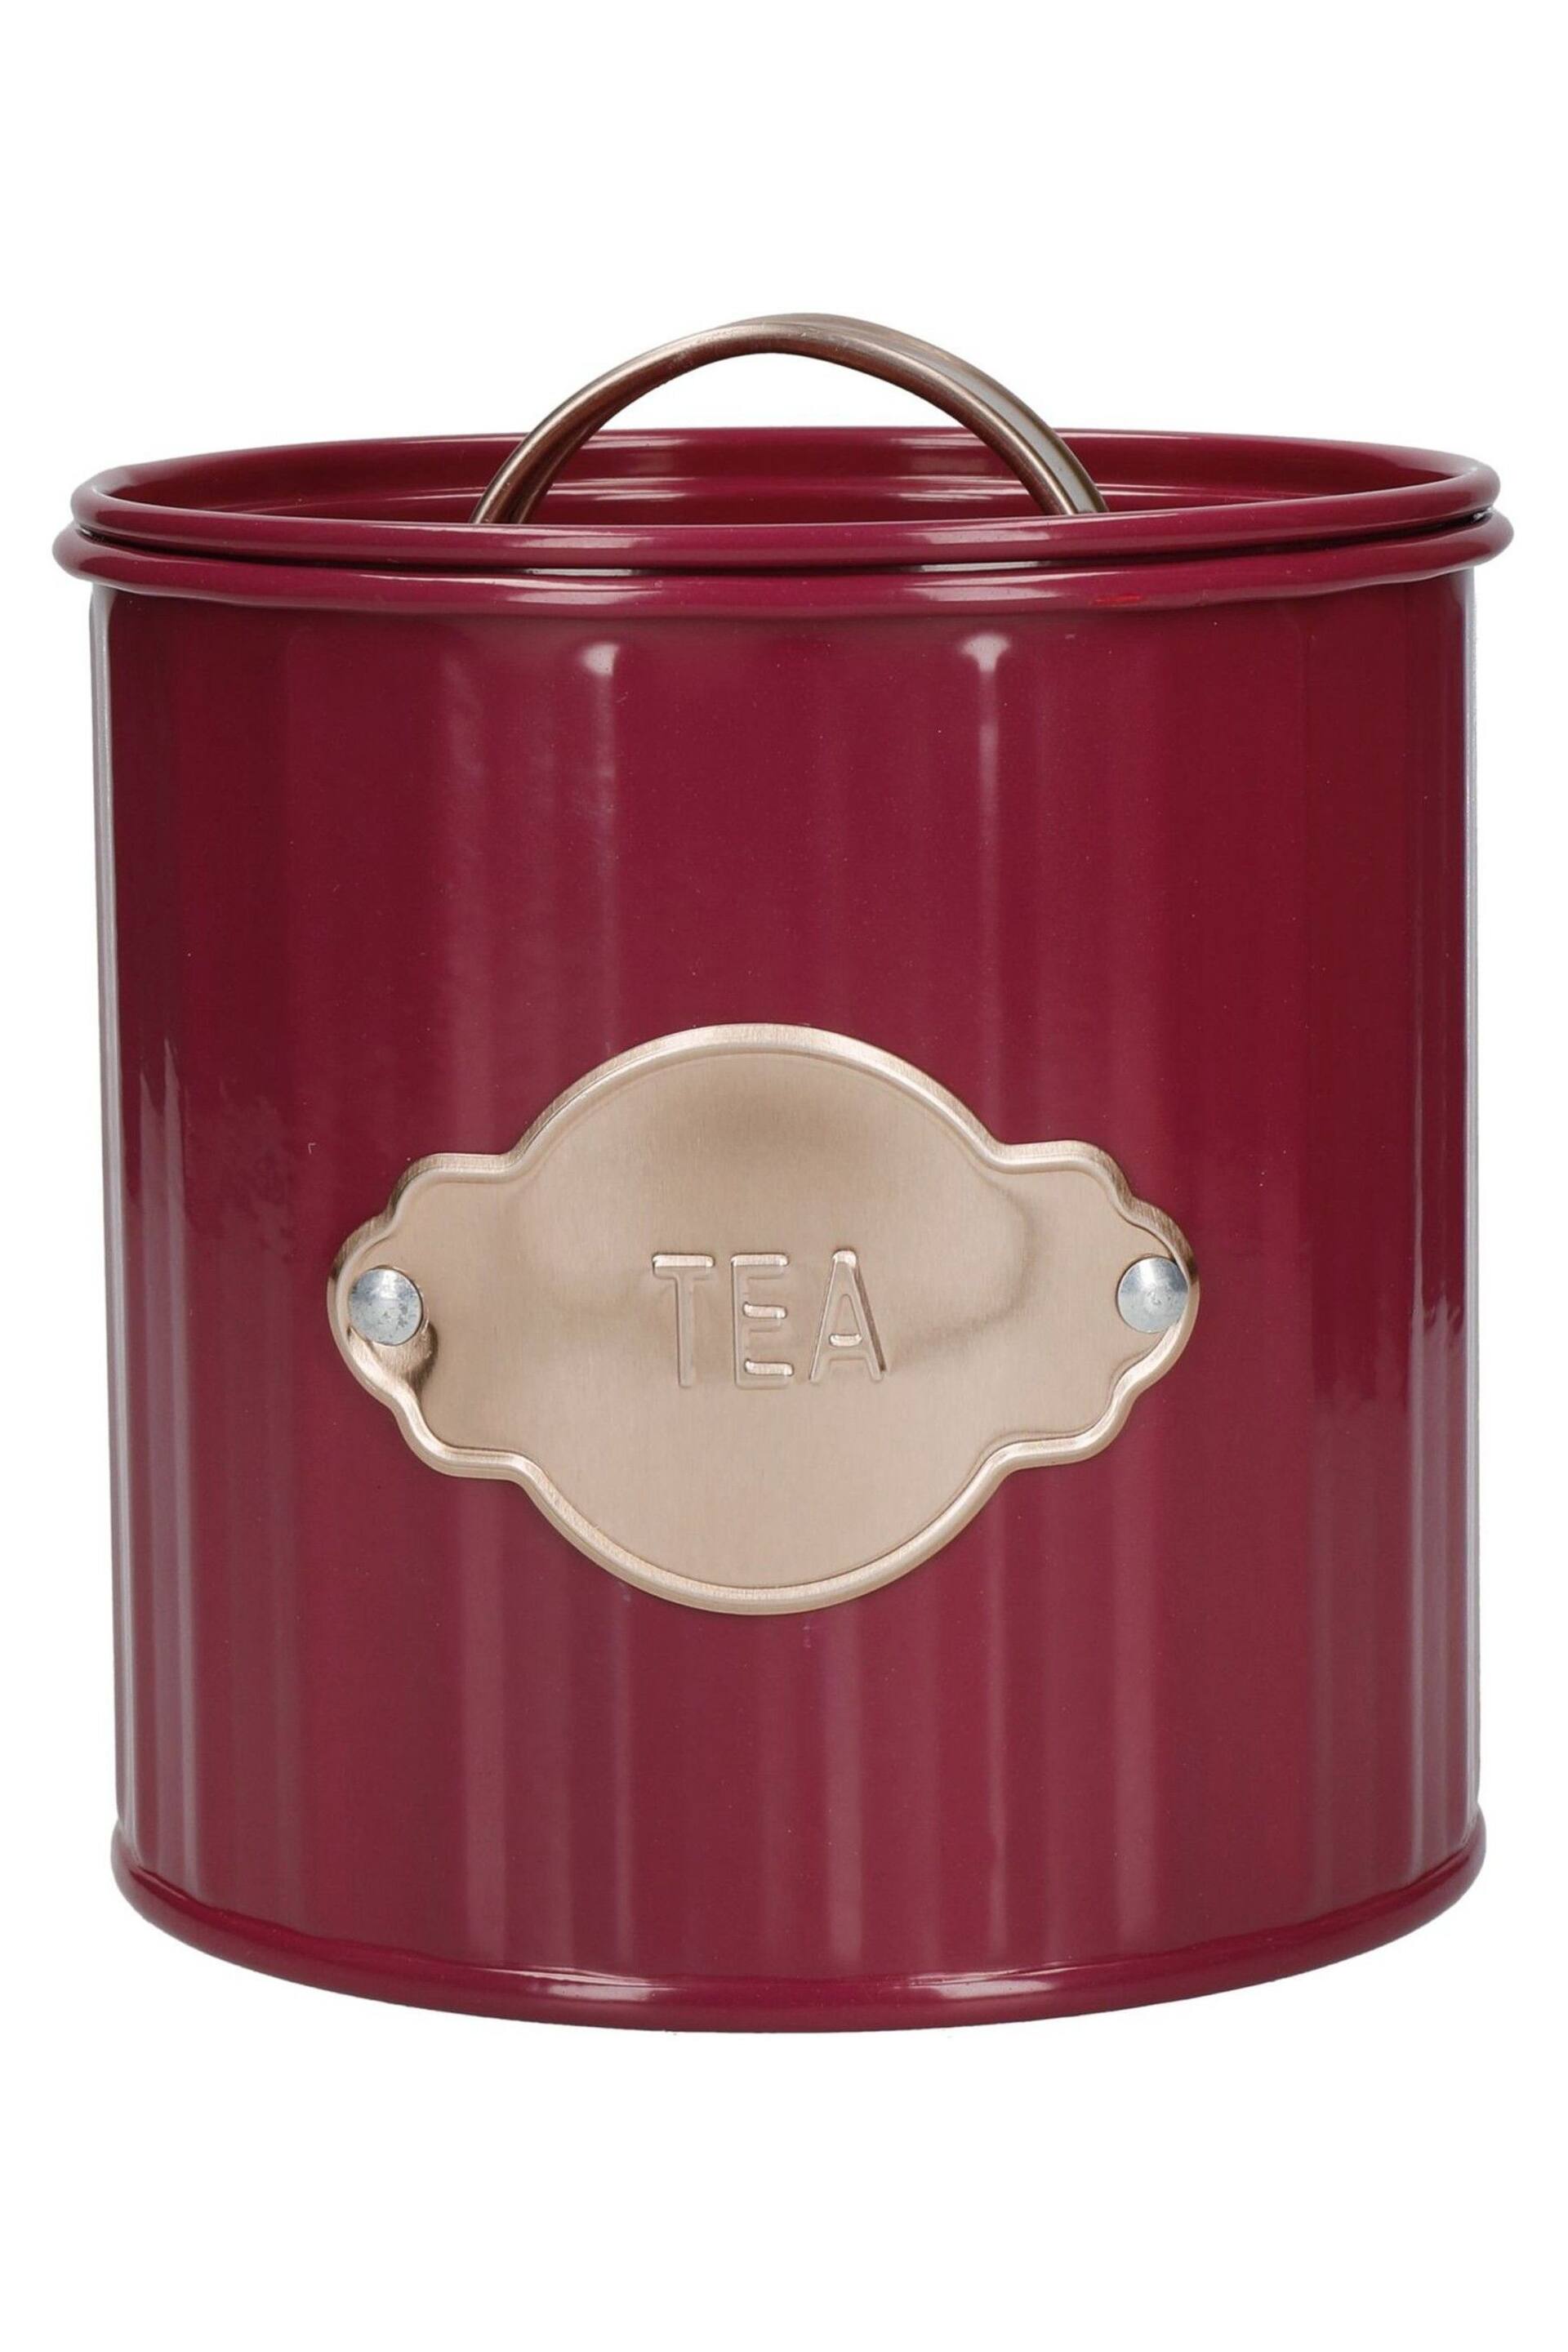 Kitchencraft Burgundy 3 Pieces Storage Canisters - Image 3 of 3